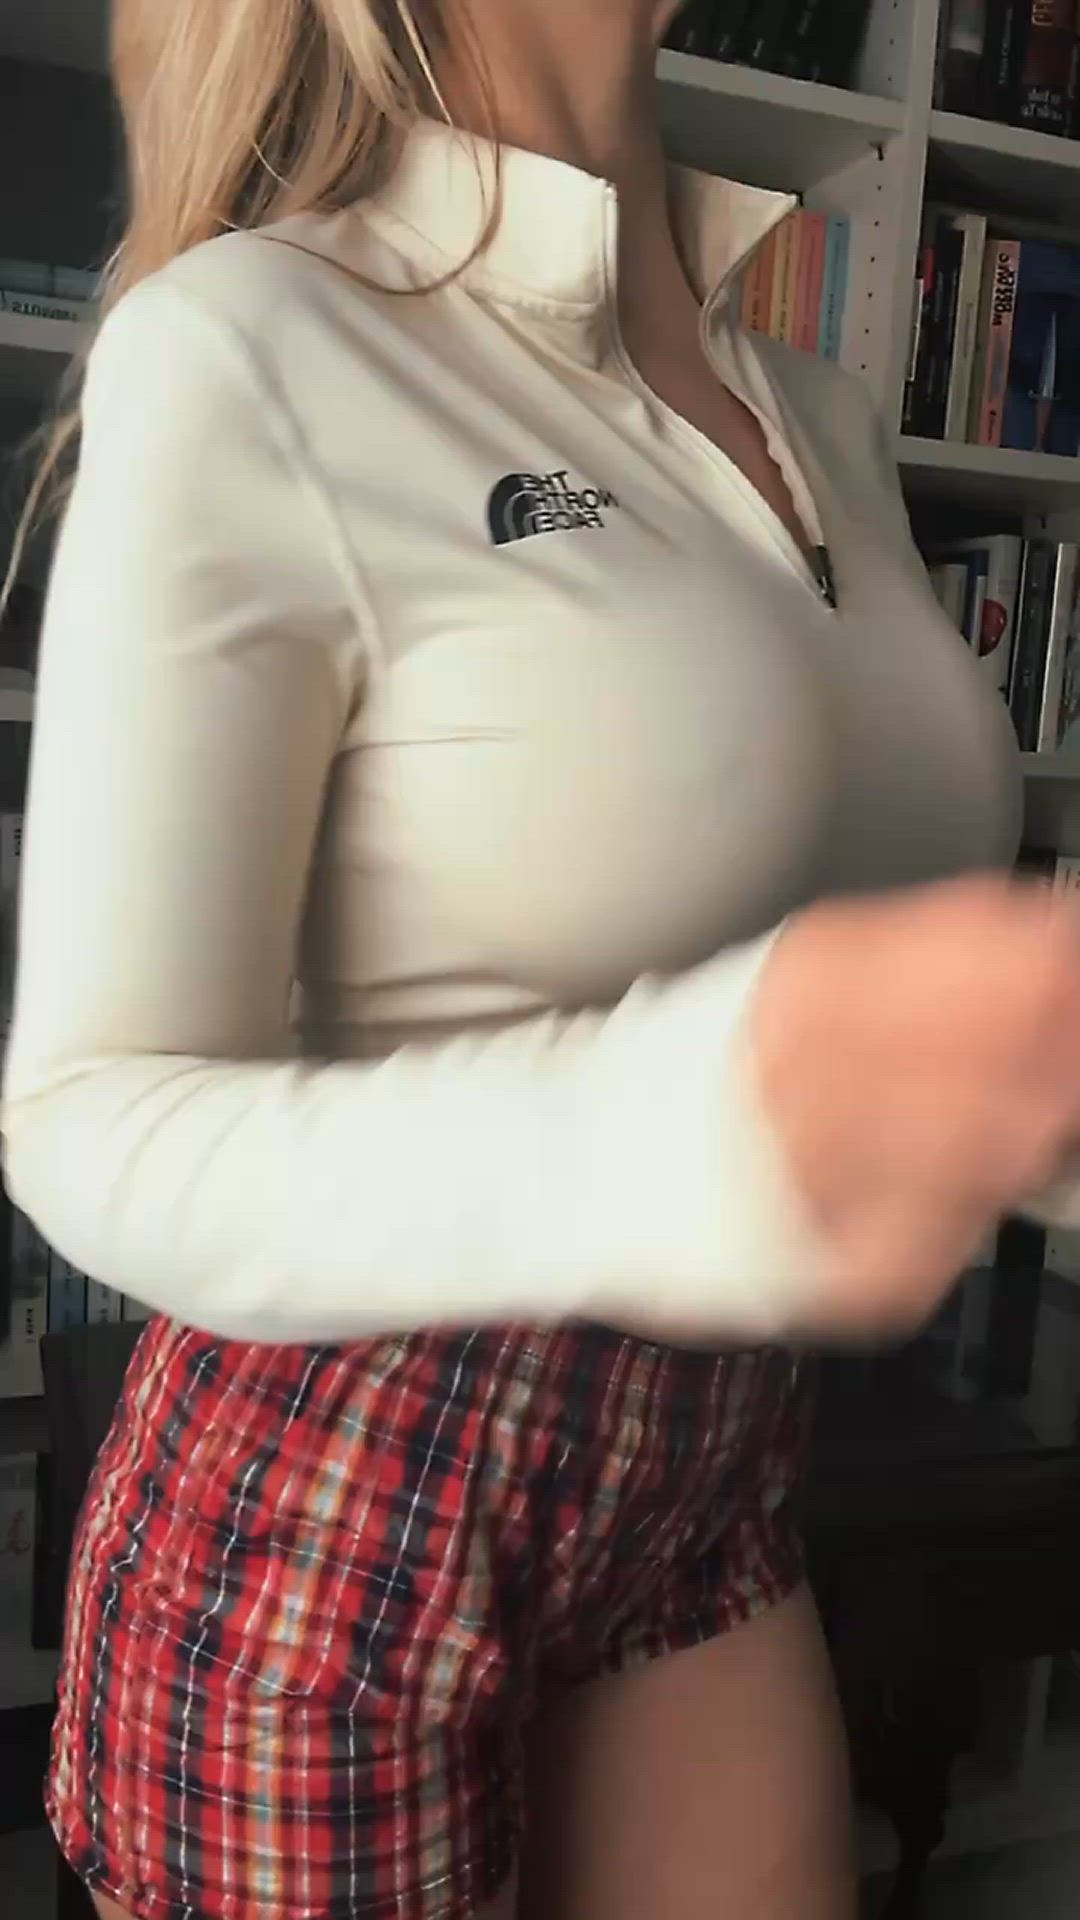 Big Tits porn video with onlyfans model Olivia.Harley <strong>@olivia.harley</strong>